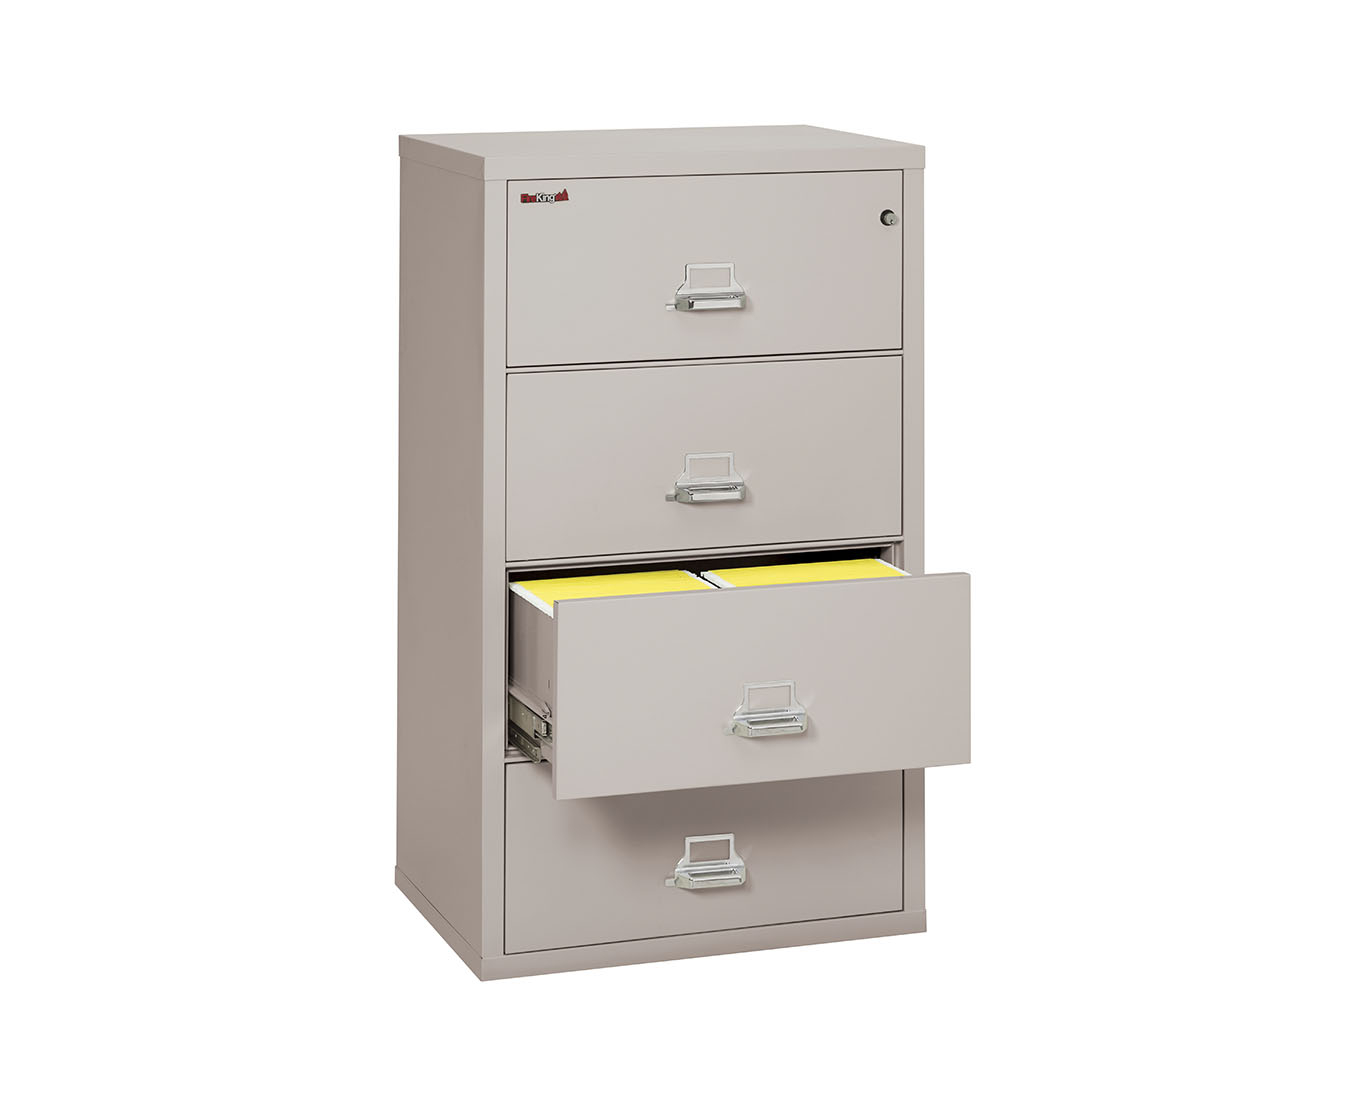 Classic Lateral File Cabinets Fireking Security Group within dimensions 1366 X 1110